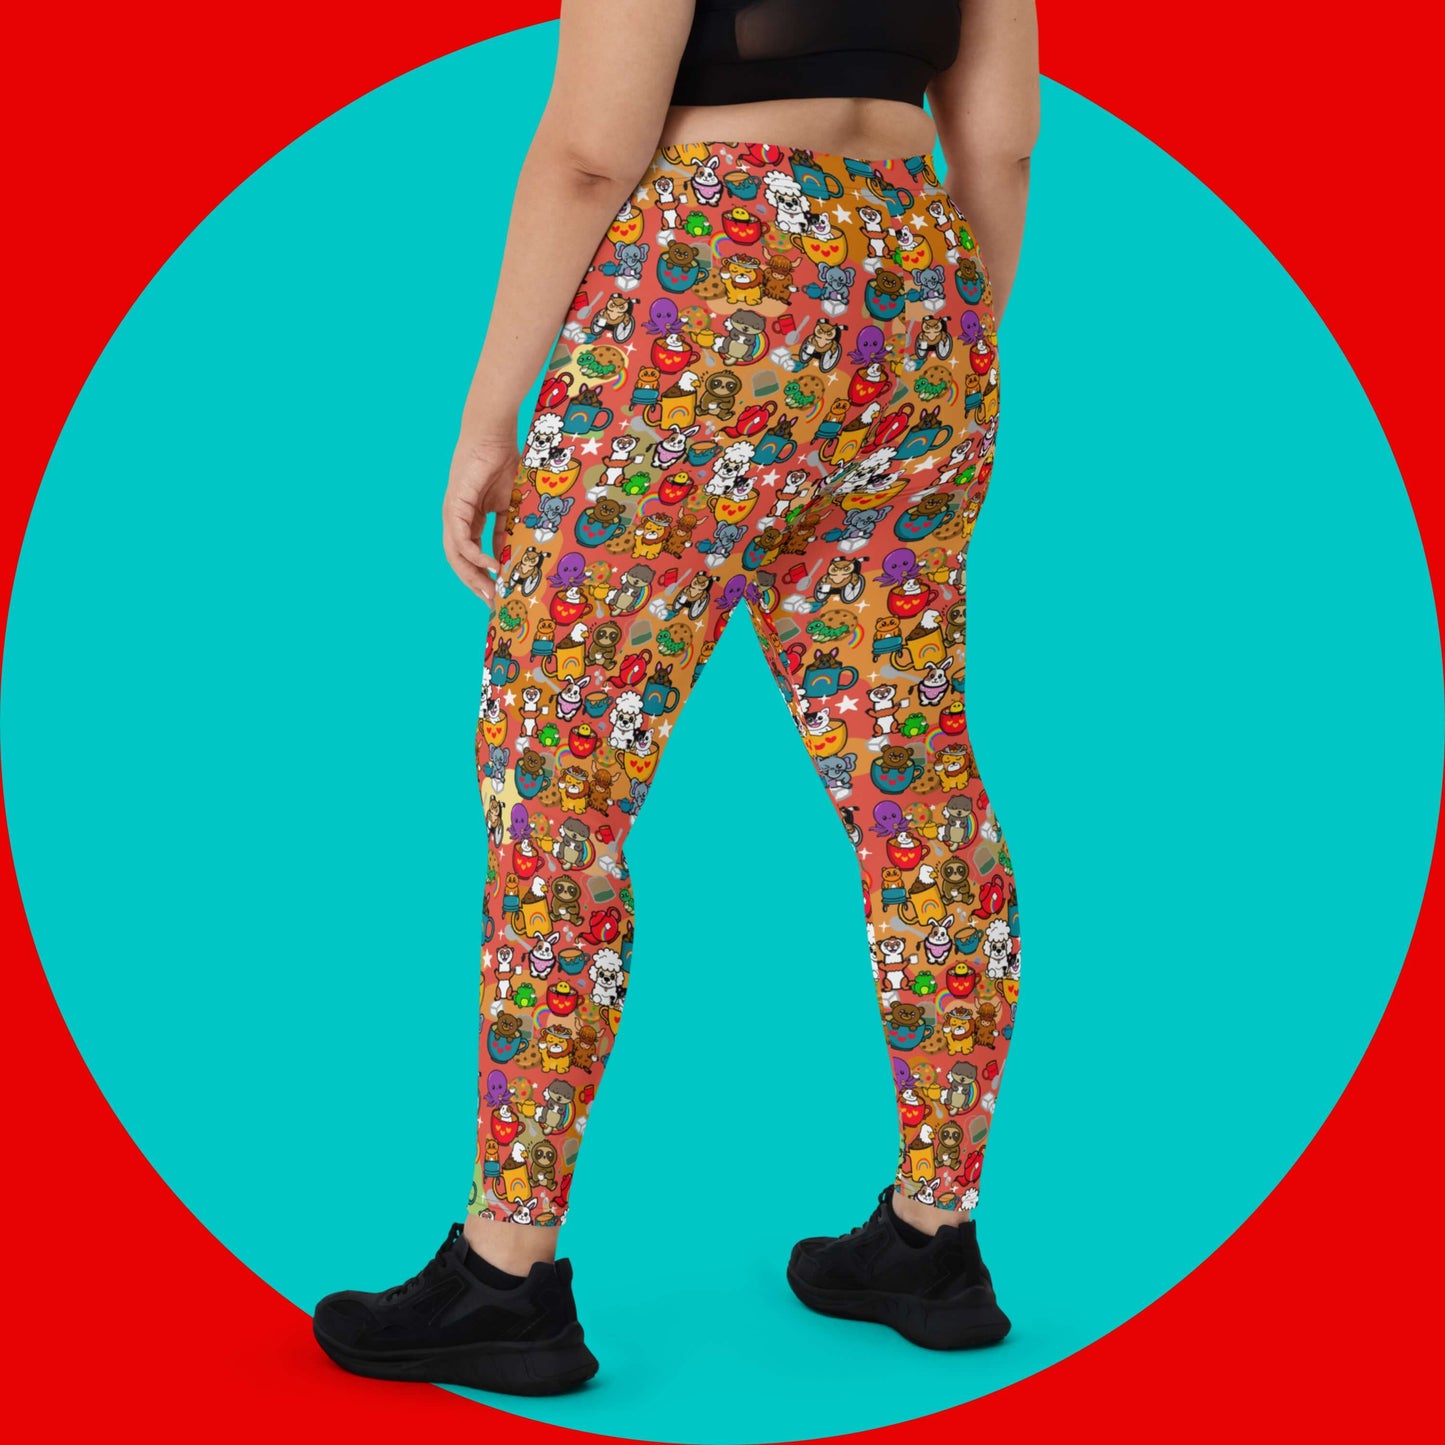 The Disabili Tea and Biscuits - Disability Leggings being modelled by a femme person wearing a black tee and black trainers on a red and blue background. The leggings feature various disabled and chronically ill animal characters drinking tea, sitting in tea mugs and holding up mugs. There is also various cookie biscuits, tea bags, sugar cubes, teapots, rainbows, sparkles and tea spills all underneath. The leggings are a punny gift raising awareness for disabilities.